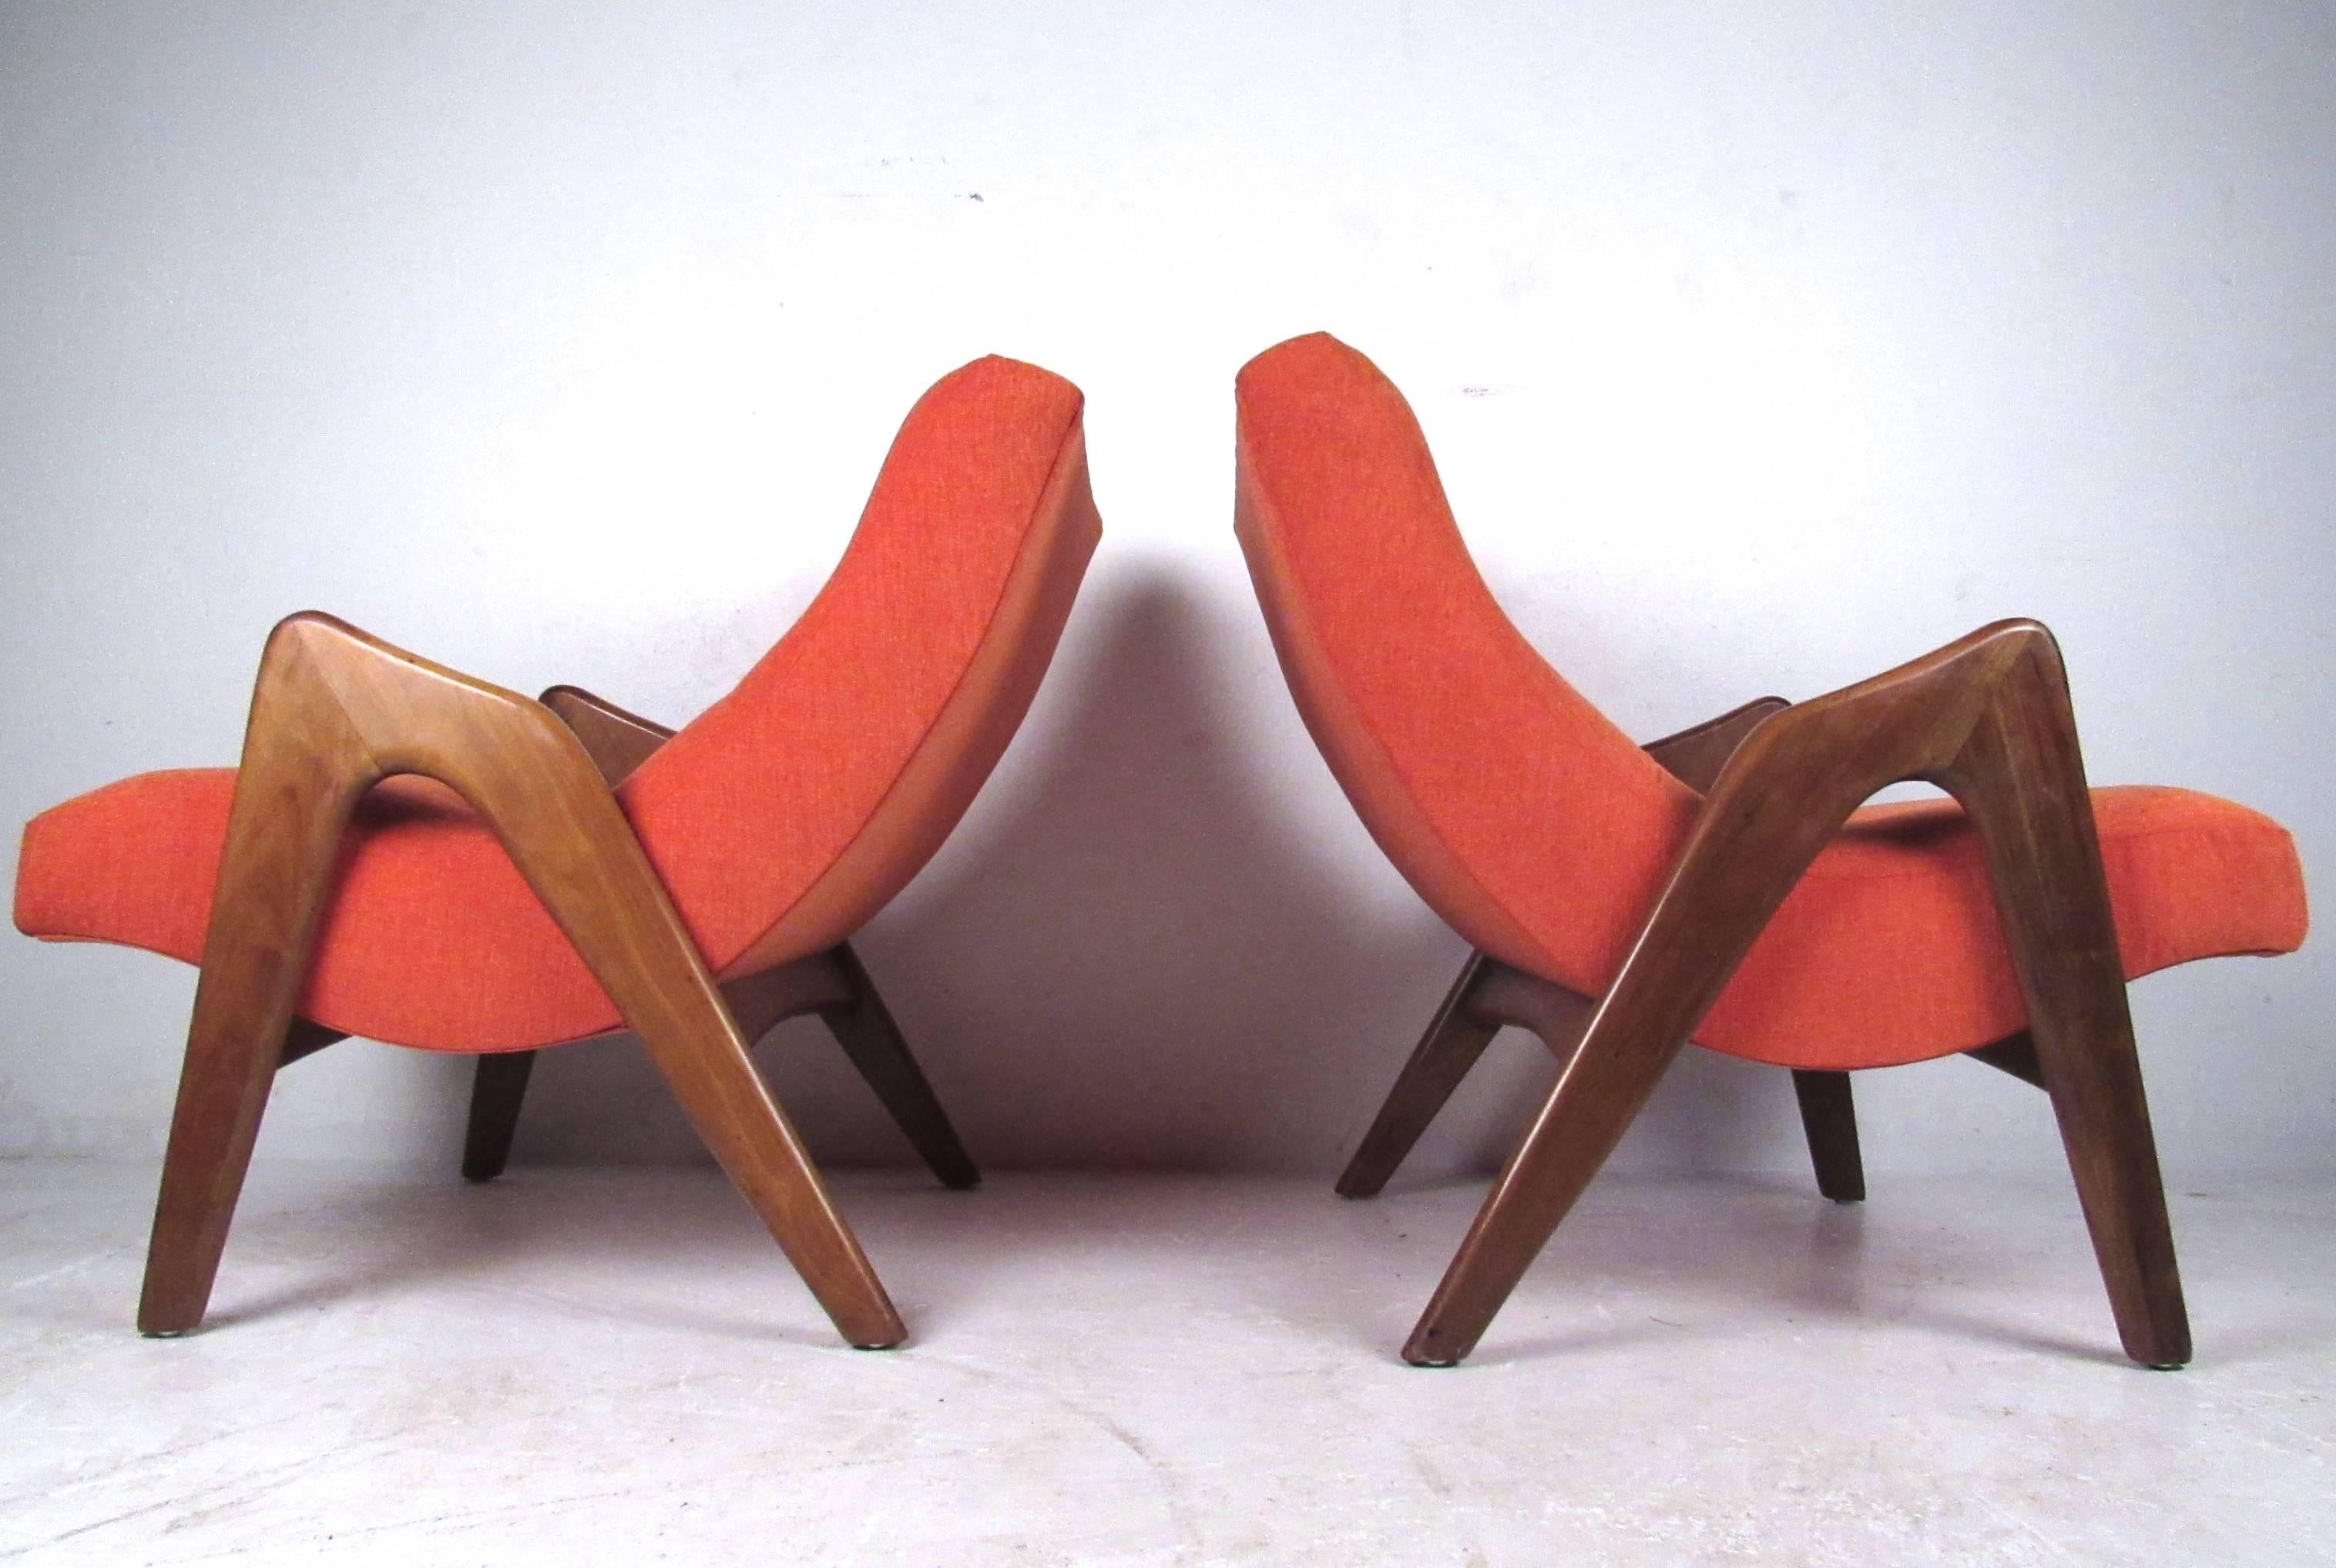 Beautiful pair of sculpted Mid-Century lounge chairs features the comfort and design Pearsall is so well-known for. Uniquely shaped tufted seat backs make these a comfortable and stylish addition to any interior. Please confirm item location (NY or